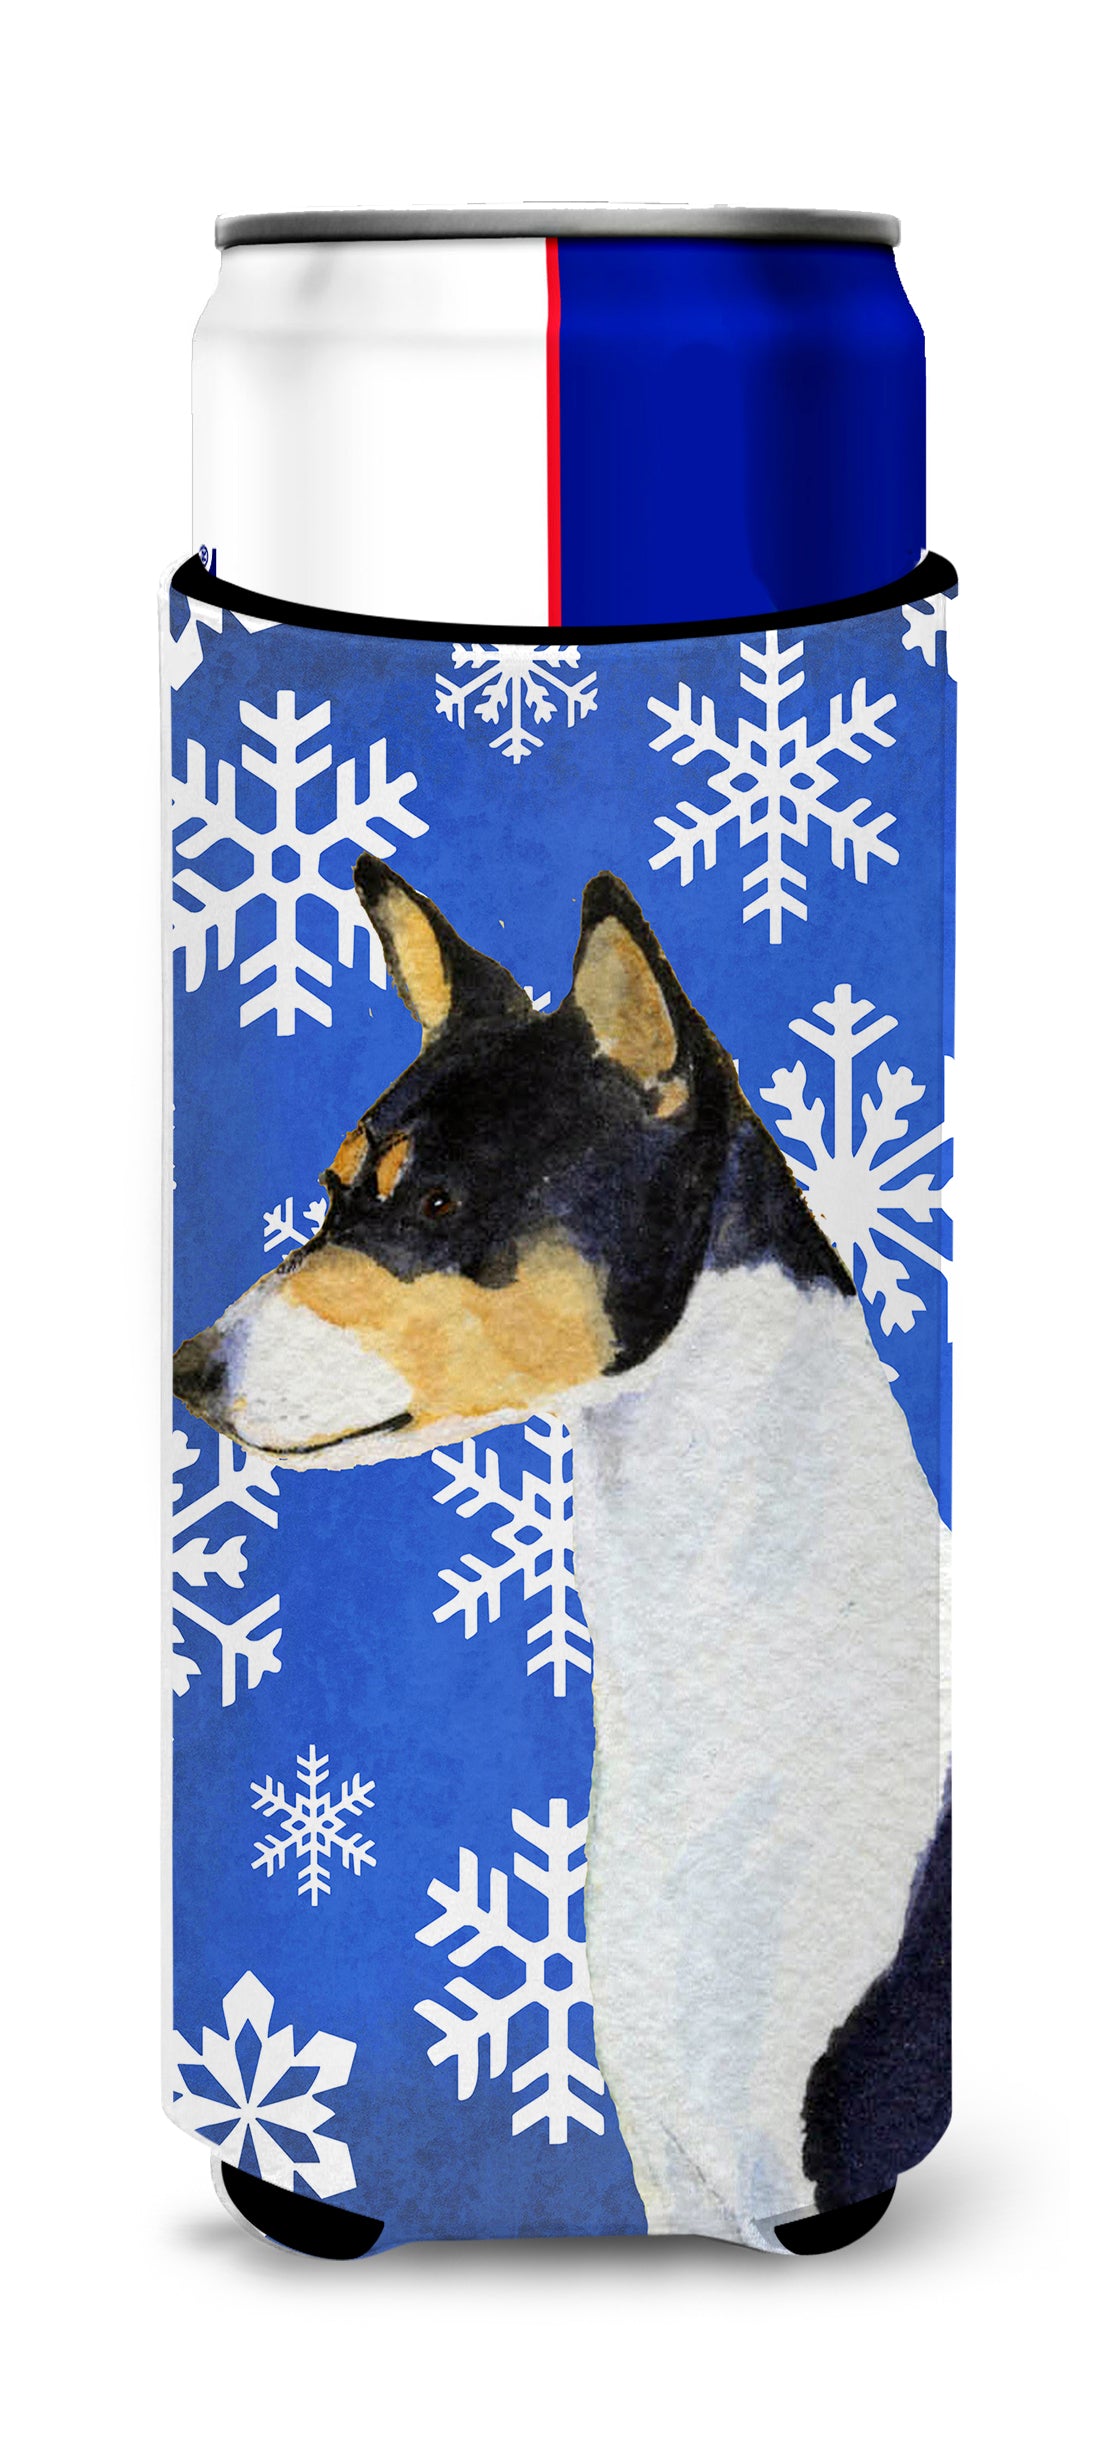 Basenji Winter Snowflakes Holiday Ultra Beverage Insulators for slim cans SS4652MUK.